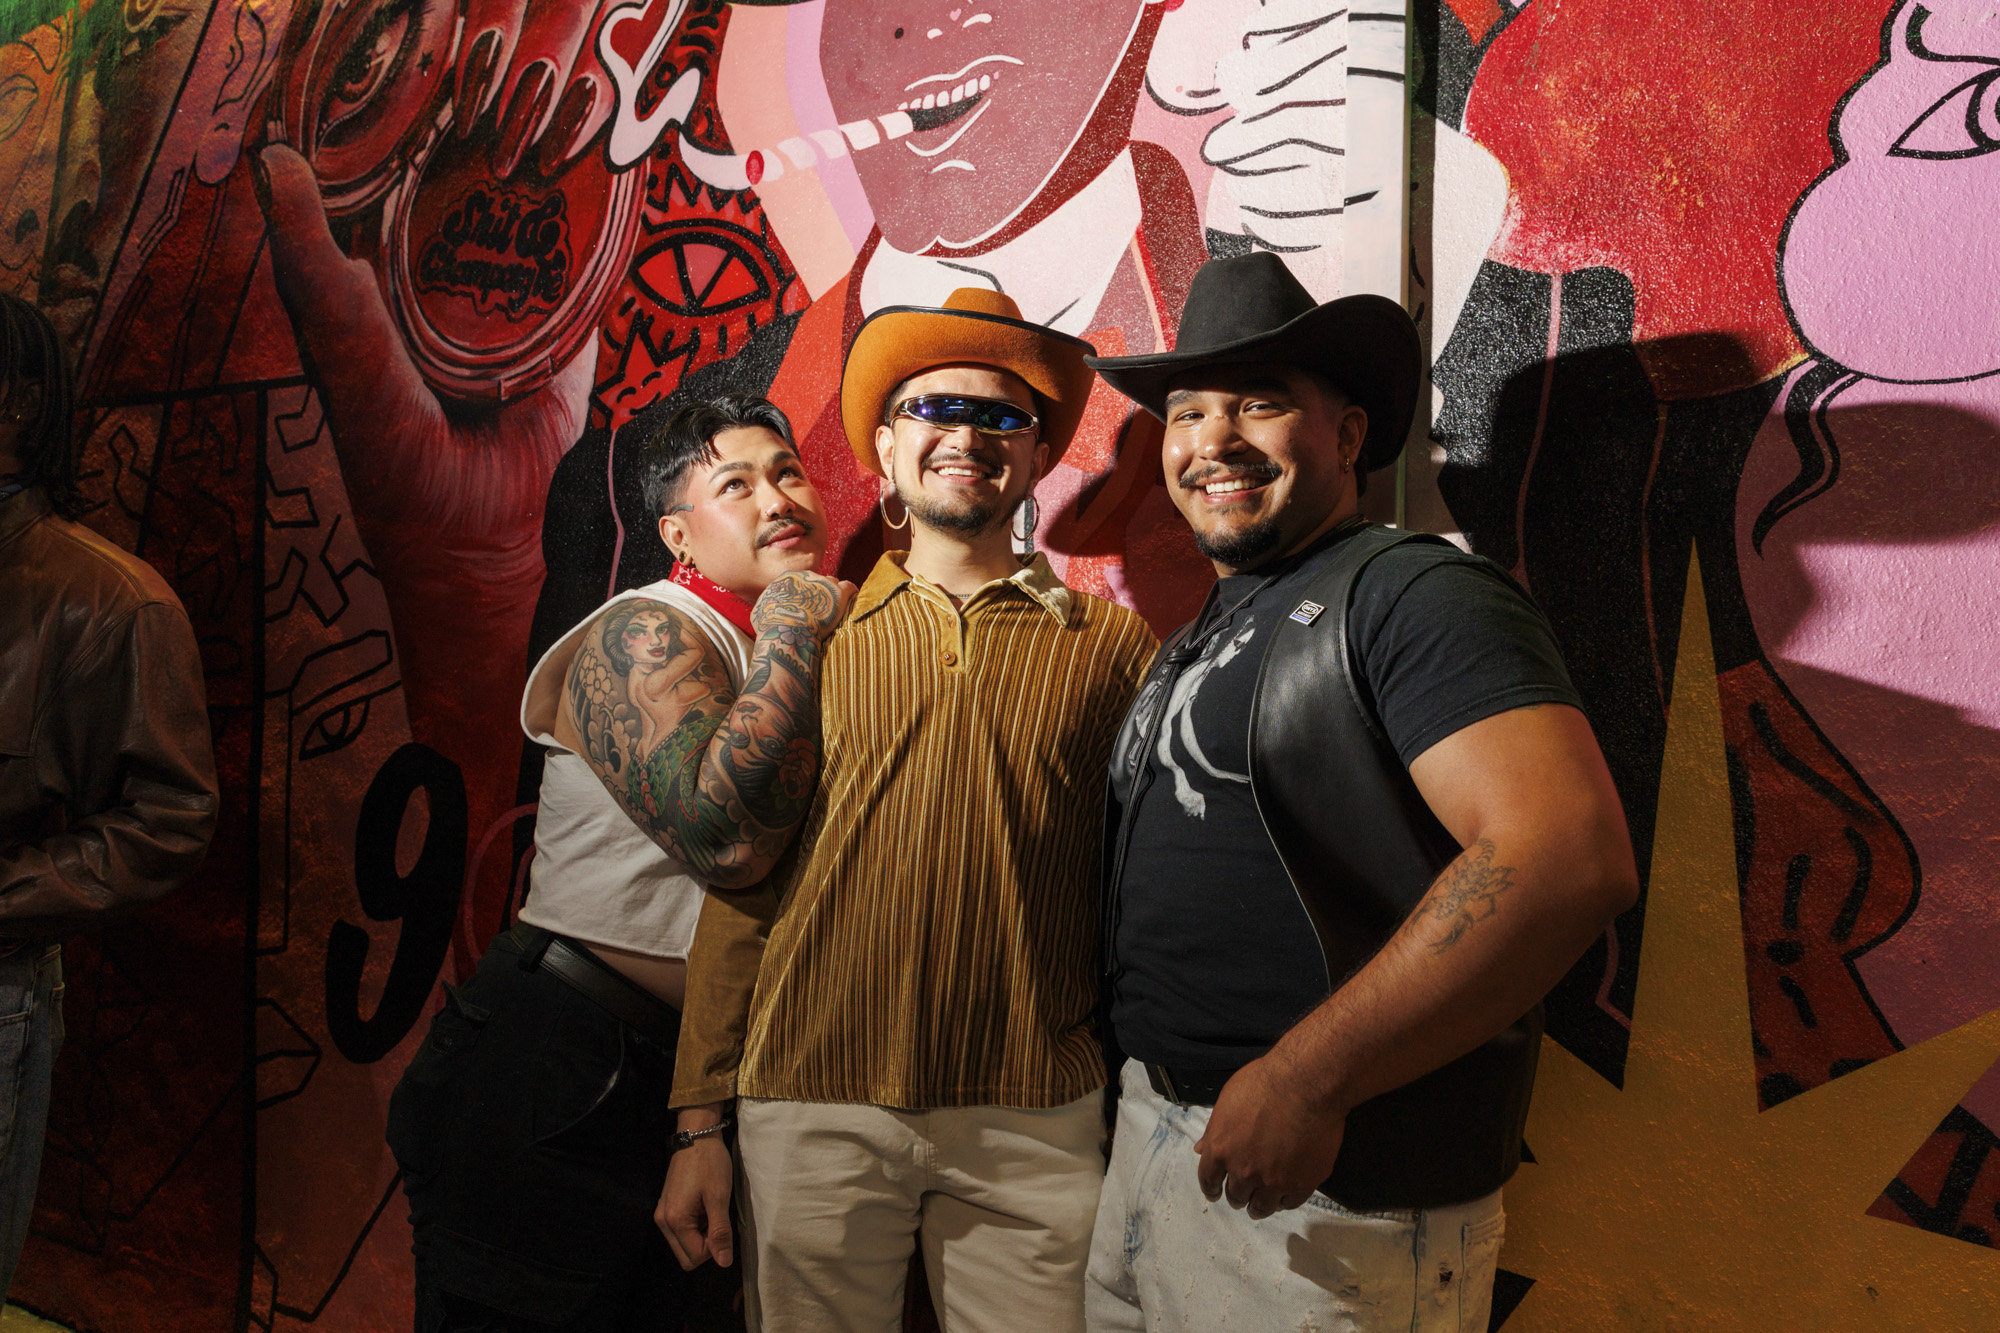 A trio of tattooed and flamboyant people, including two in cowboy hats, smile and line up before a pink and red mural.